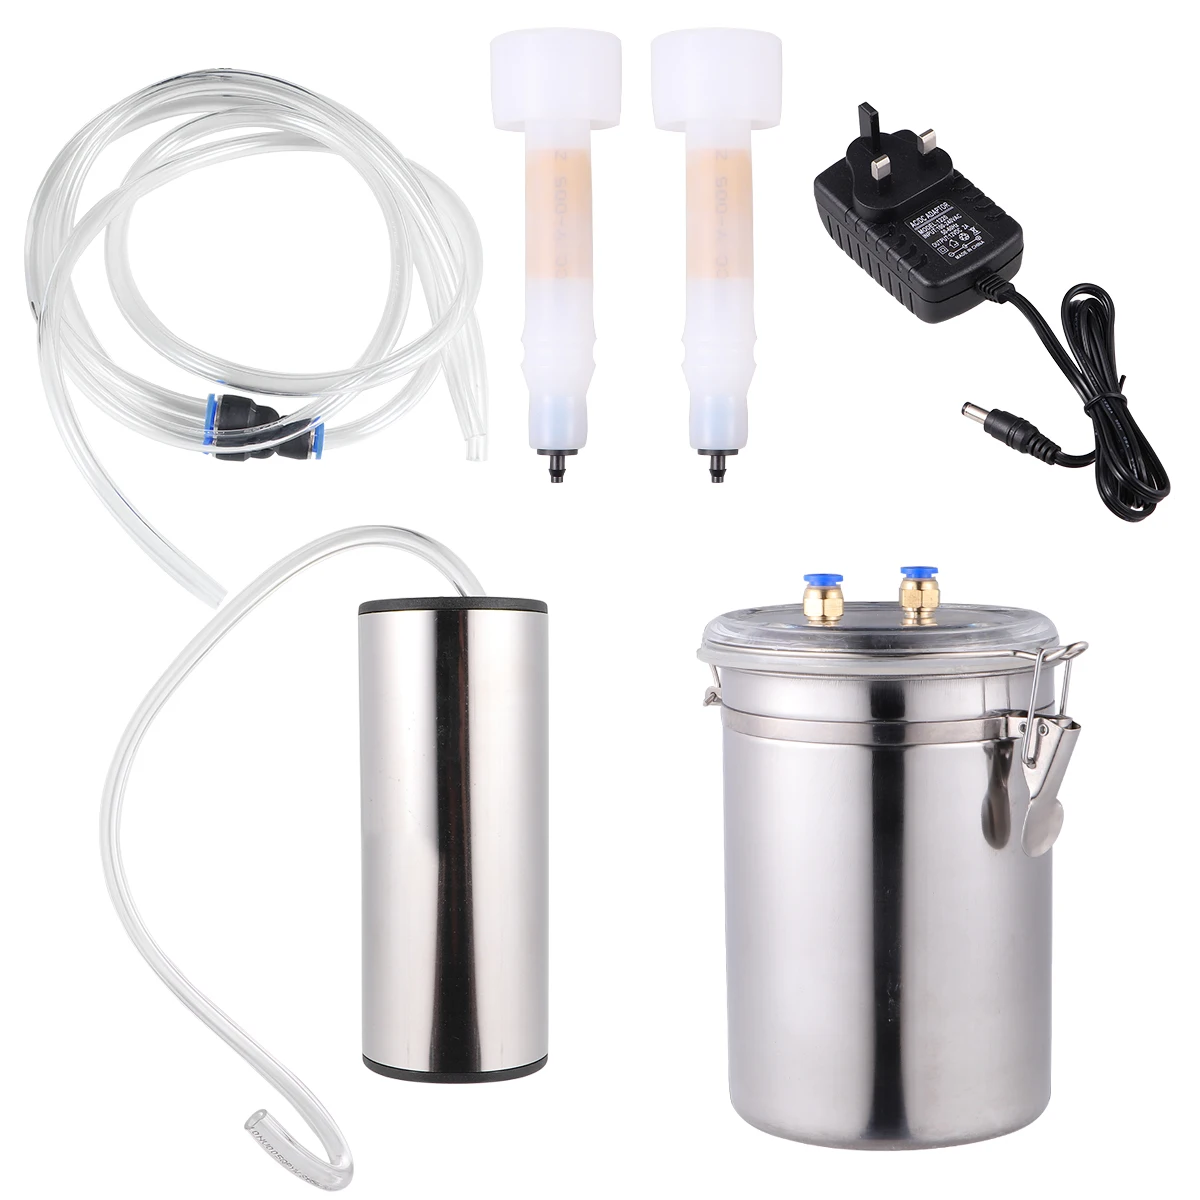 2L Electric Milking Machine Goat Sheep Stainless Steel Bucket Suction Vacuum Pump Household Milker Milking Machines ranch tools